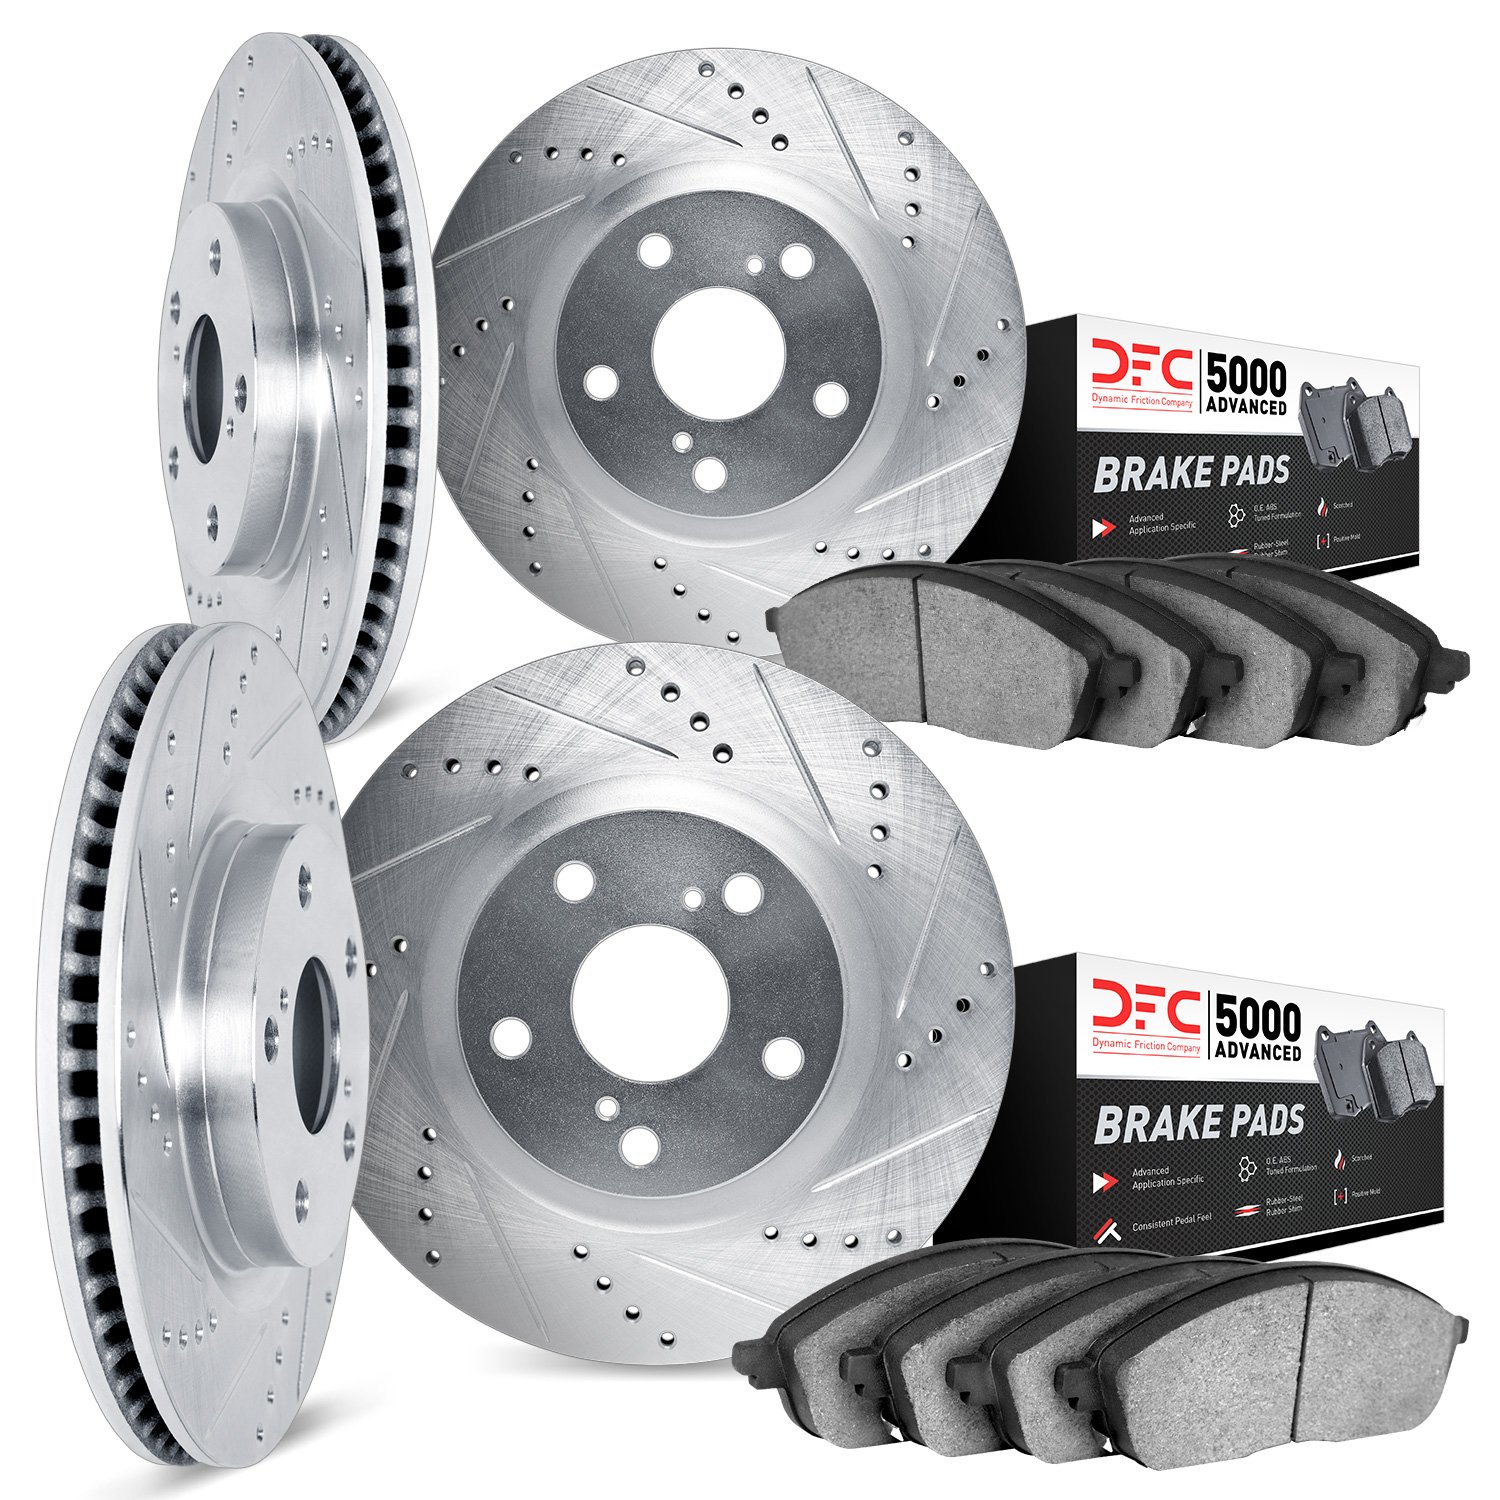 7504-31009 Drilled/Slotted Brake Rotors w/5000 Advanced Brake Pads Kit [Silver], 2006-2006 BMW, Position: Front and Rear